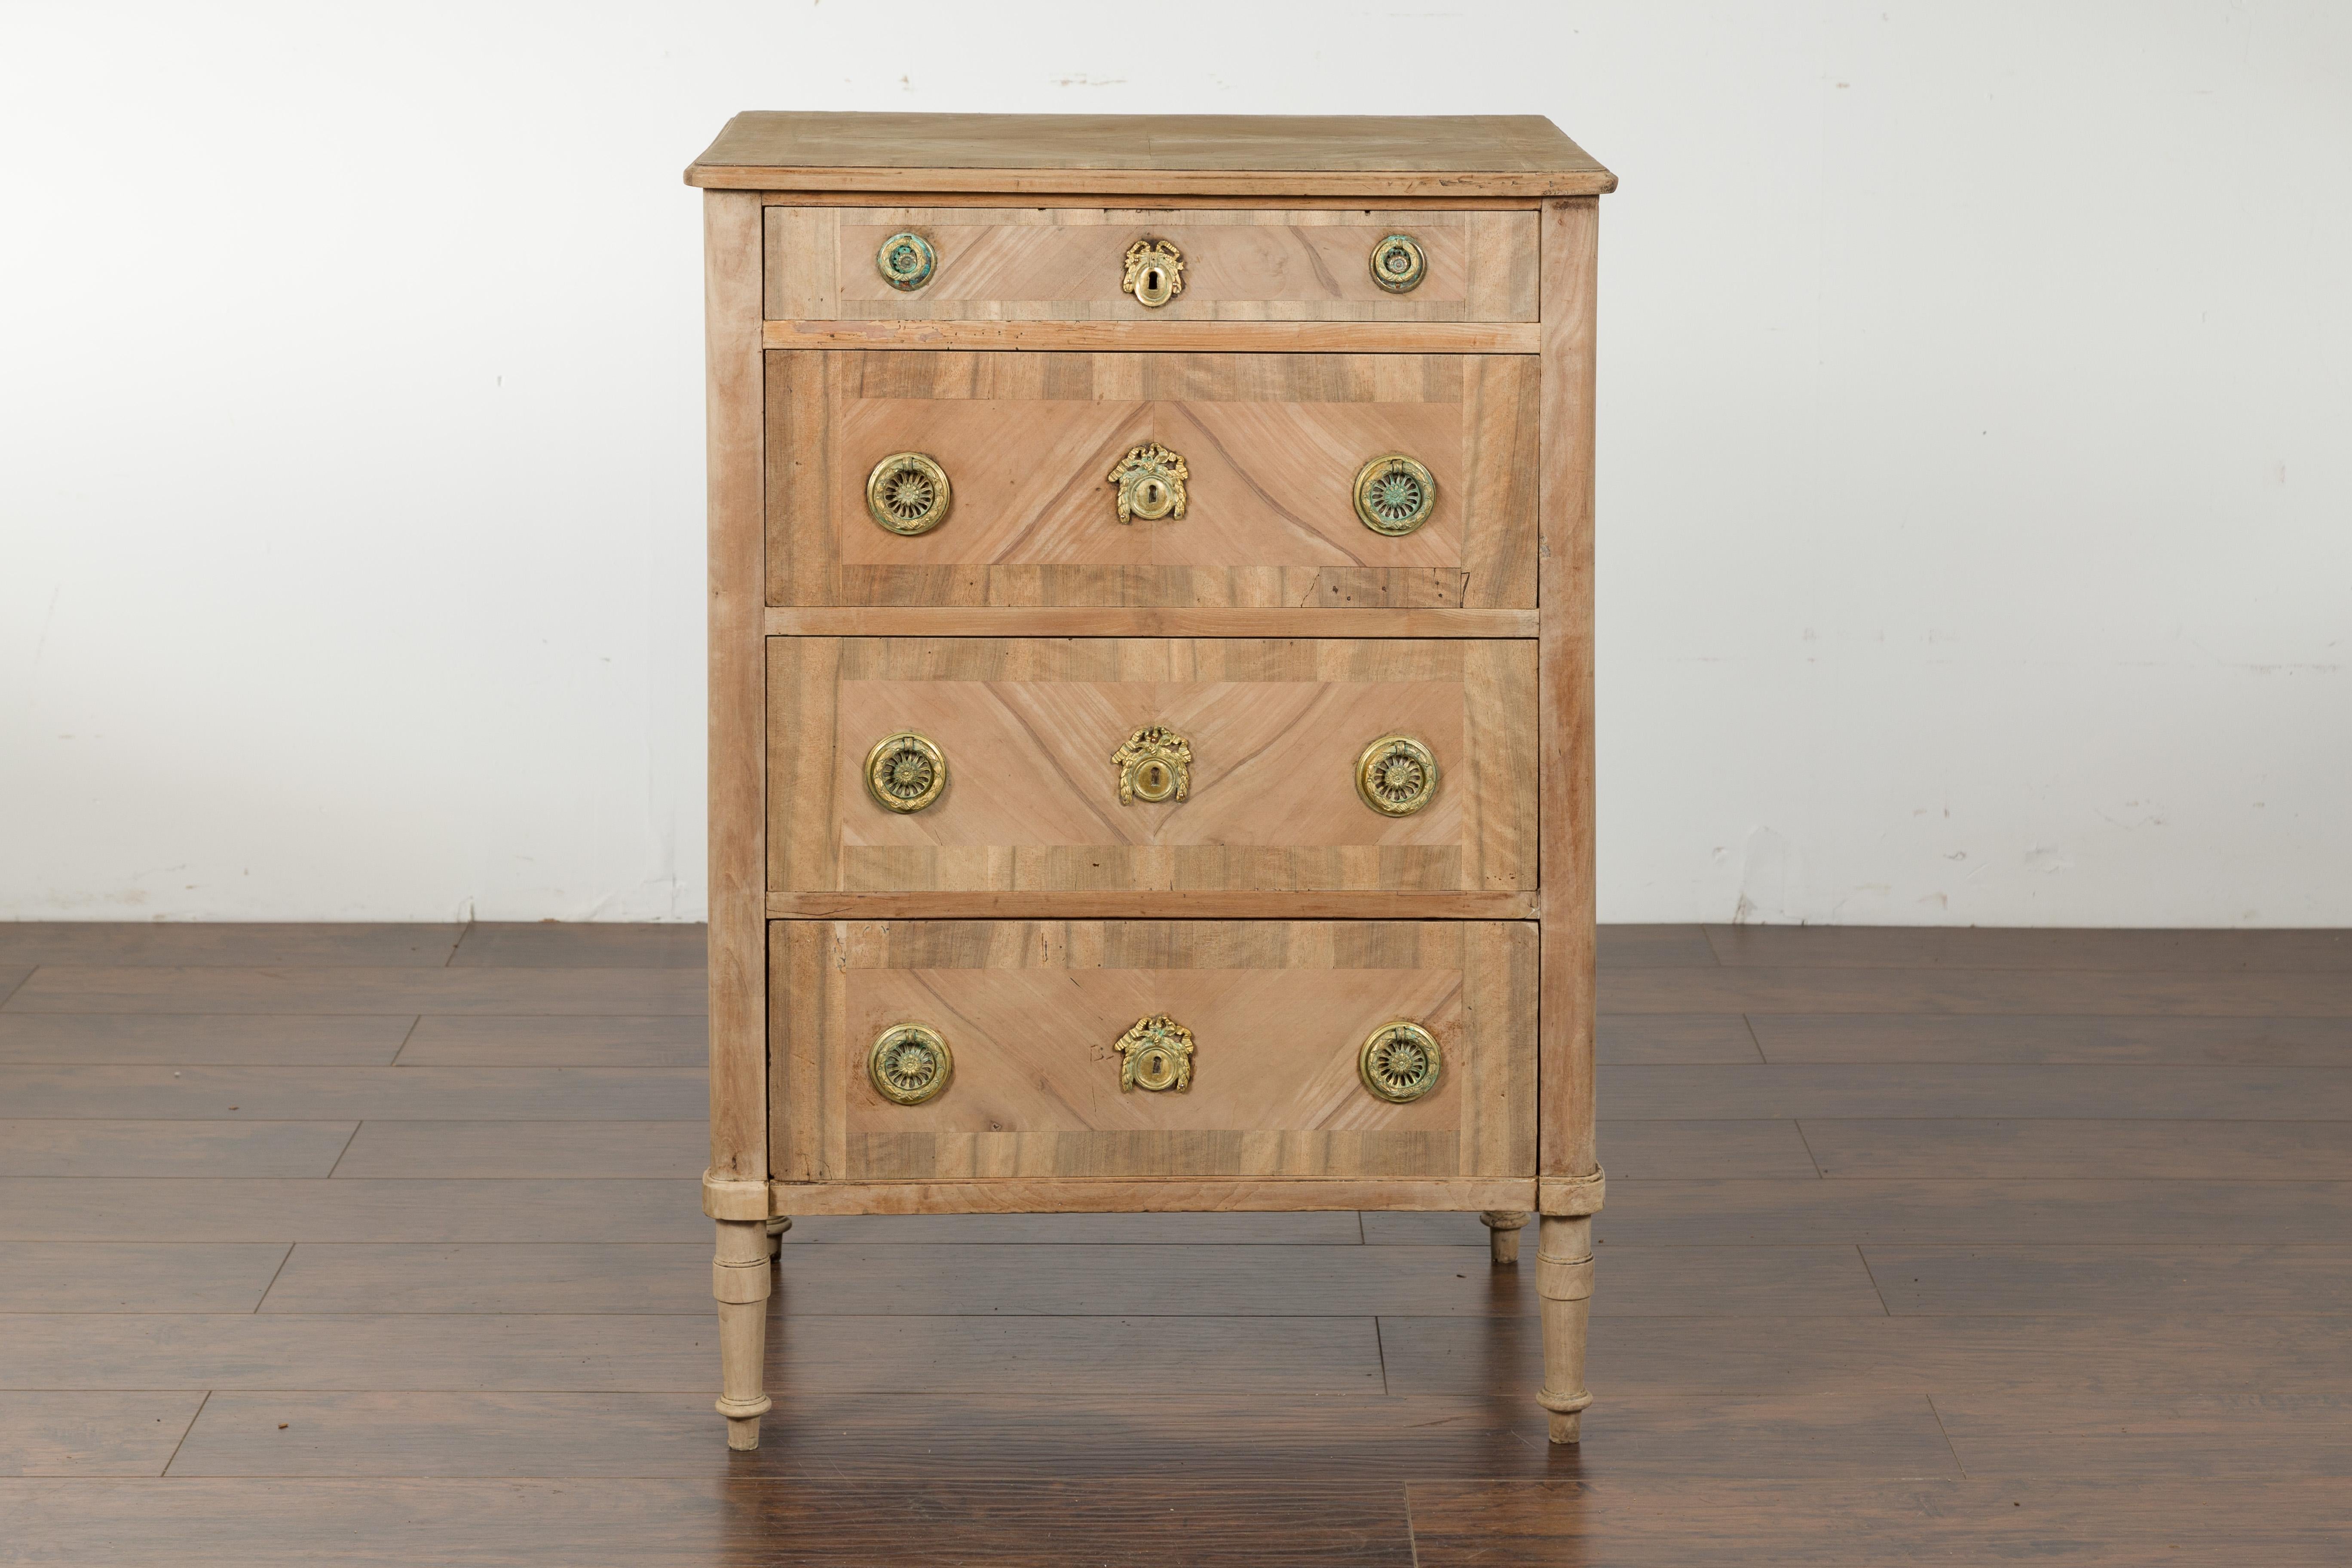 19th Century Italian 1820s Tall Bleached Walnut Four-Drawer Commode with Butterfly Veneer